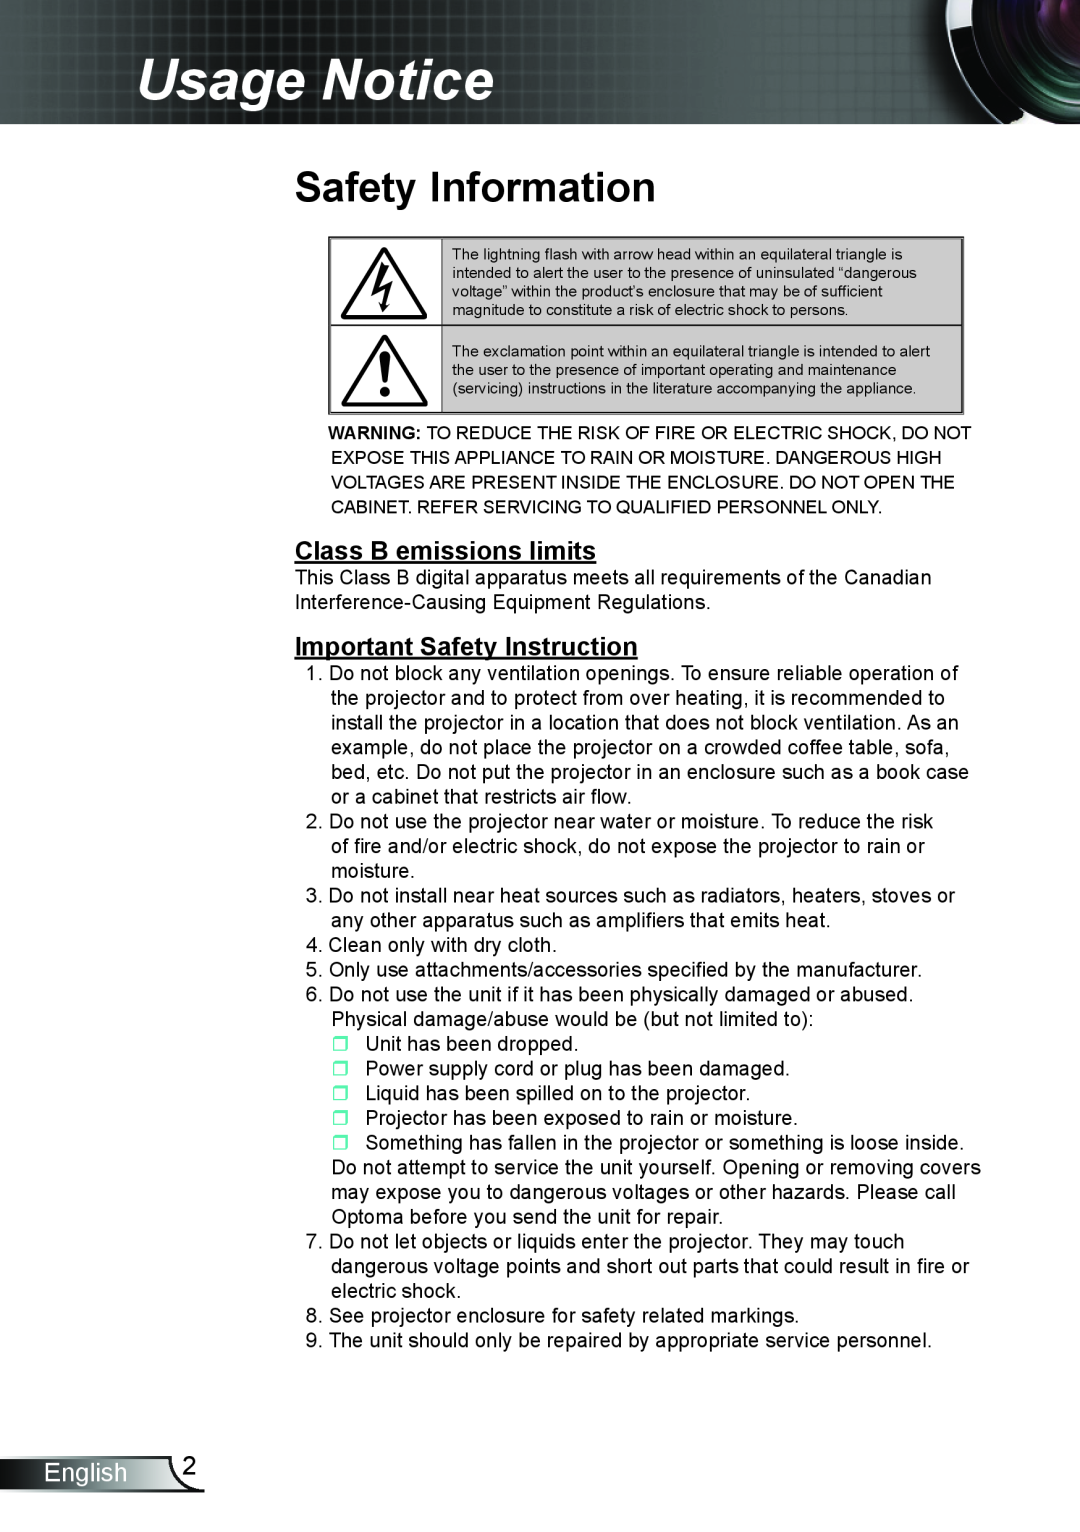 Optoma Technology TW695UT3D manual Usage Notice, Safety Information, Class B emissions limits, Important Safety Instruction 